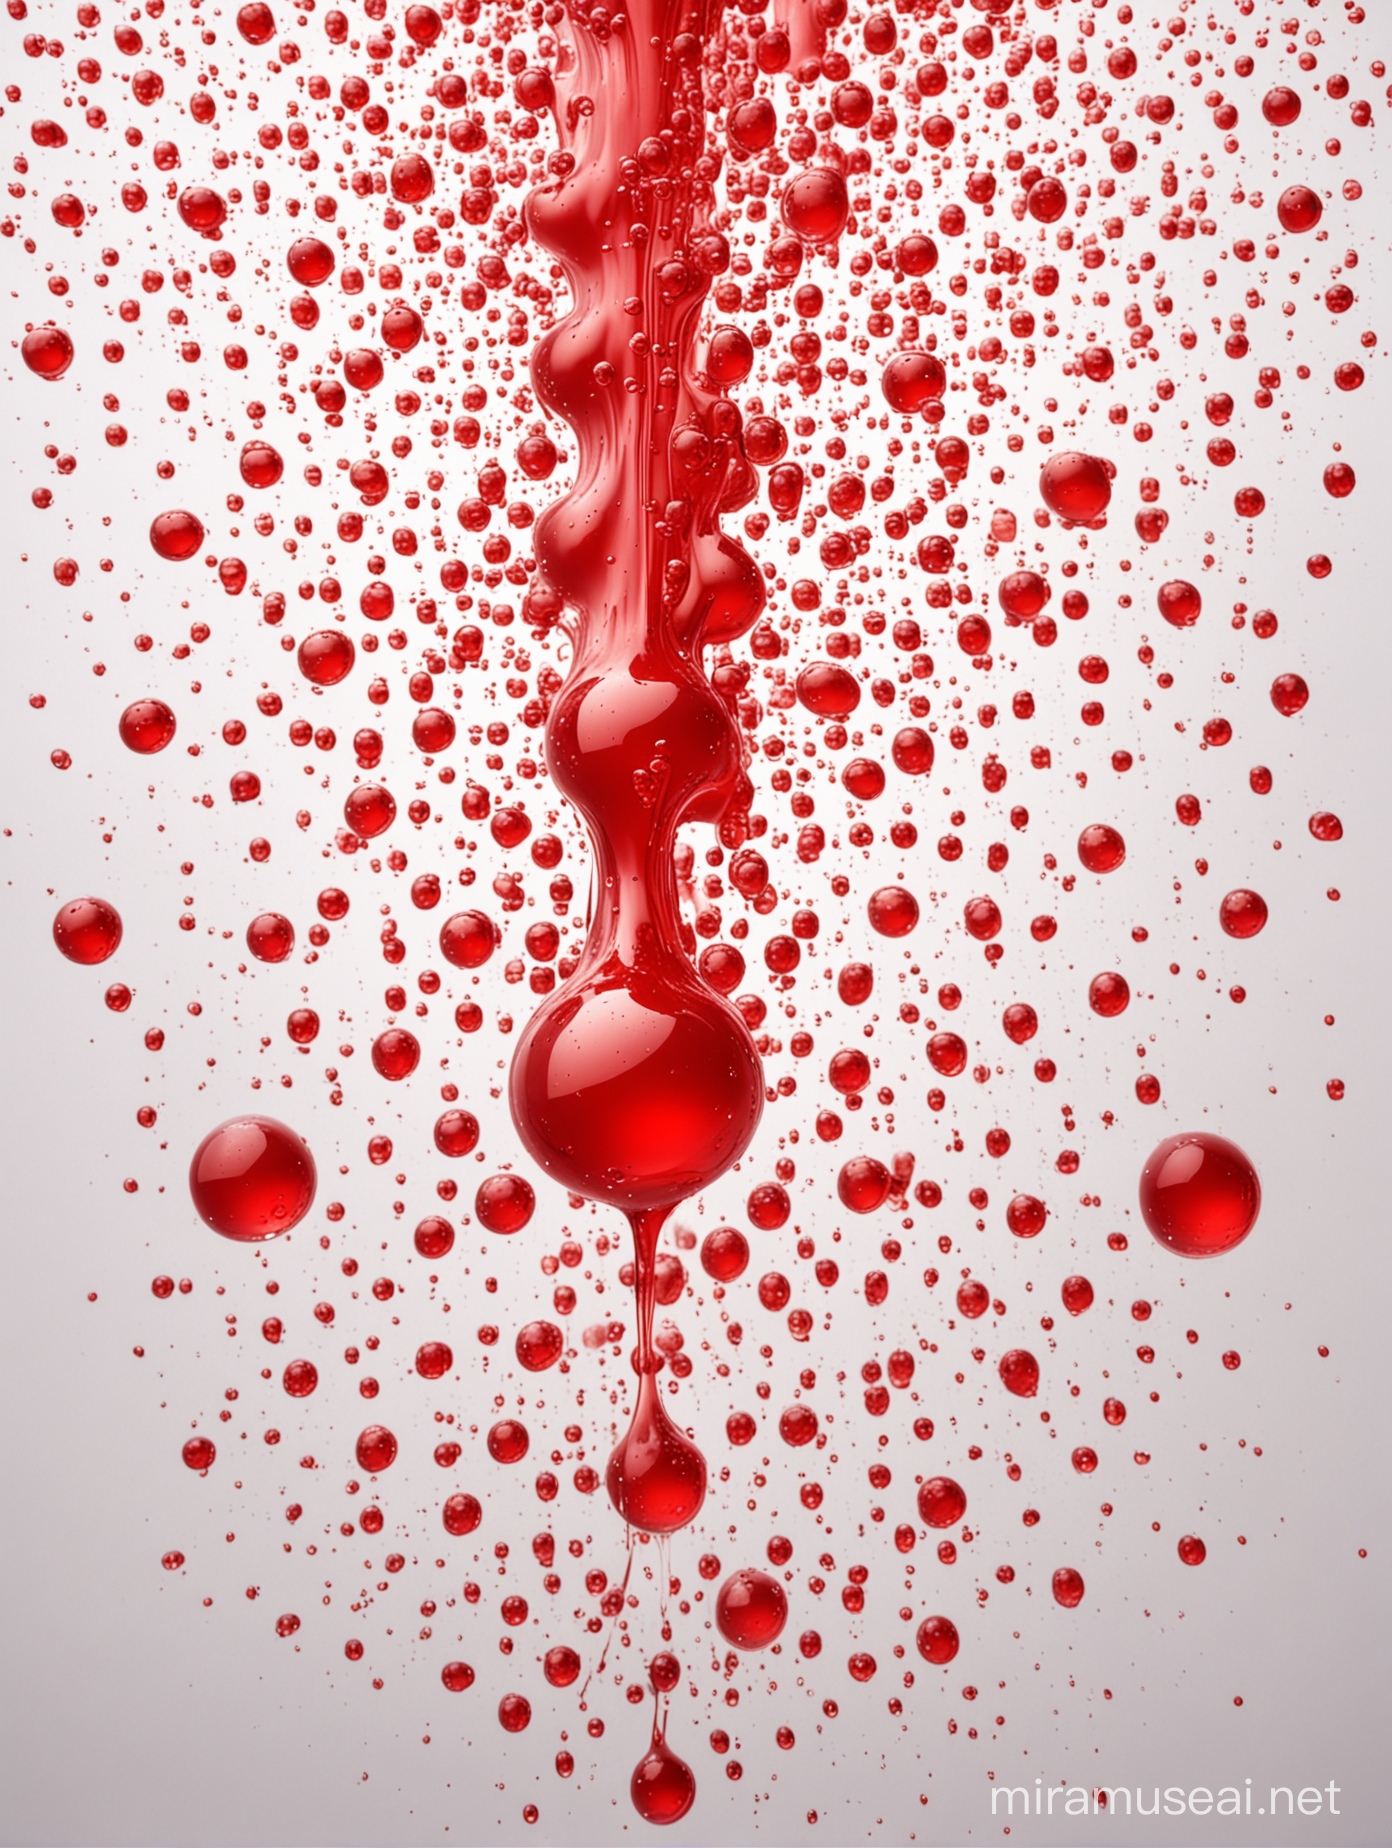 Vibrant Red Droplets in Scattered Showers Abstract Art on White Background